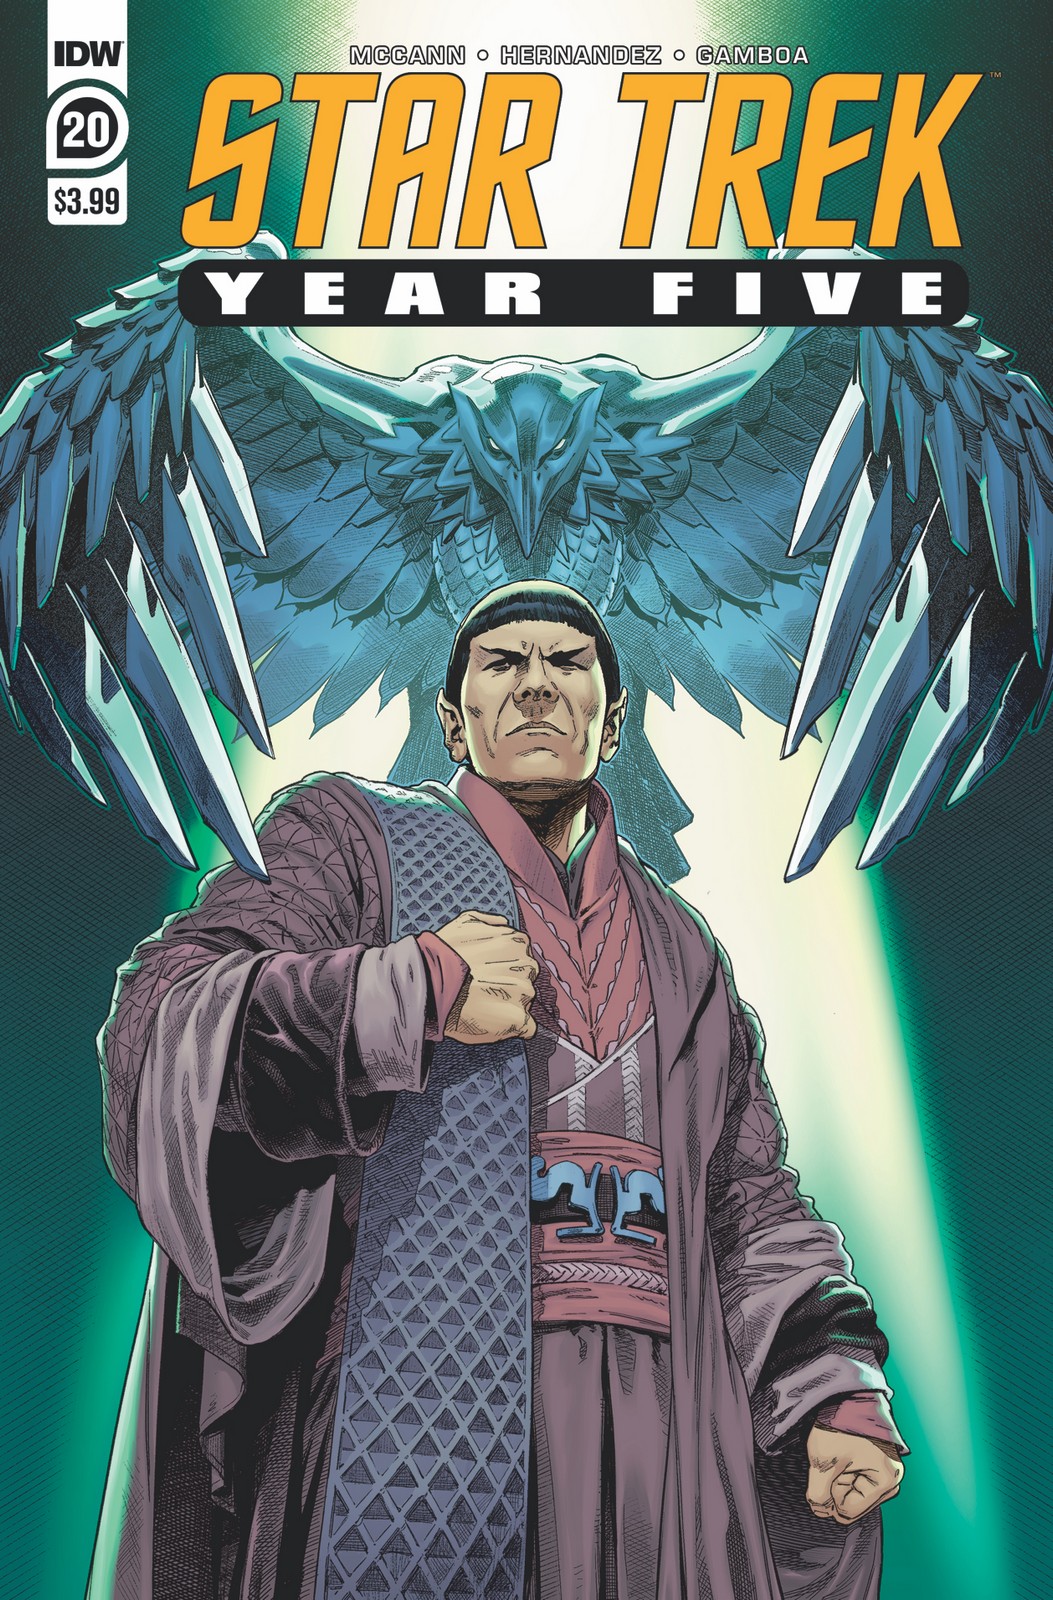 ST_YearFive20-cover